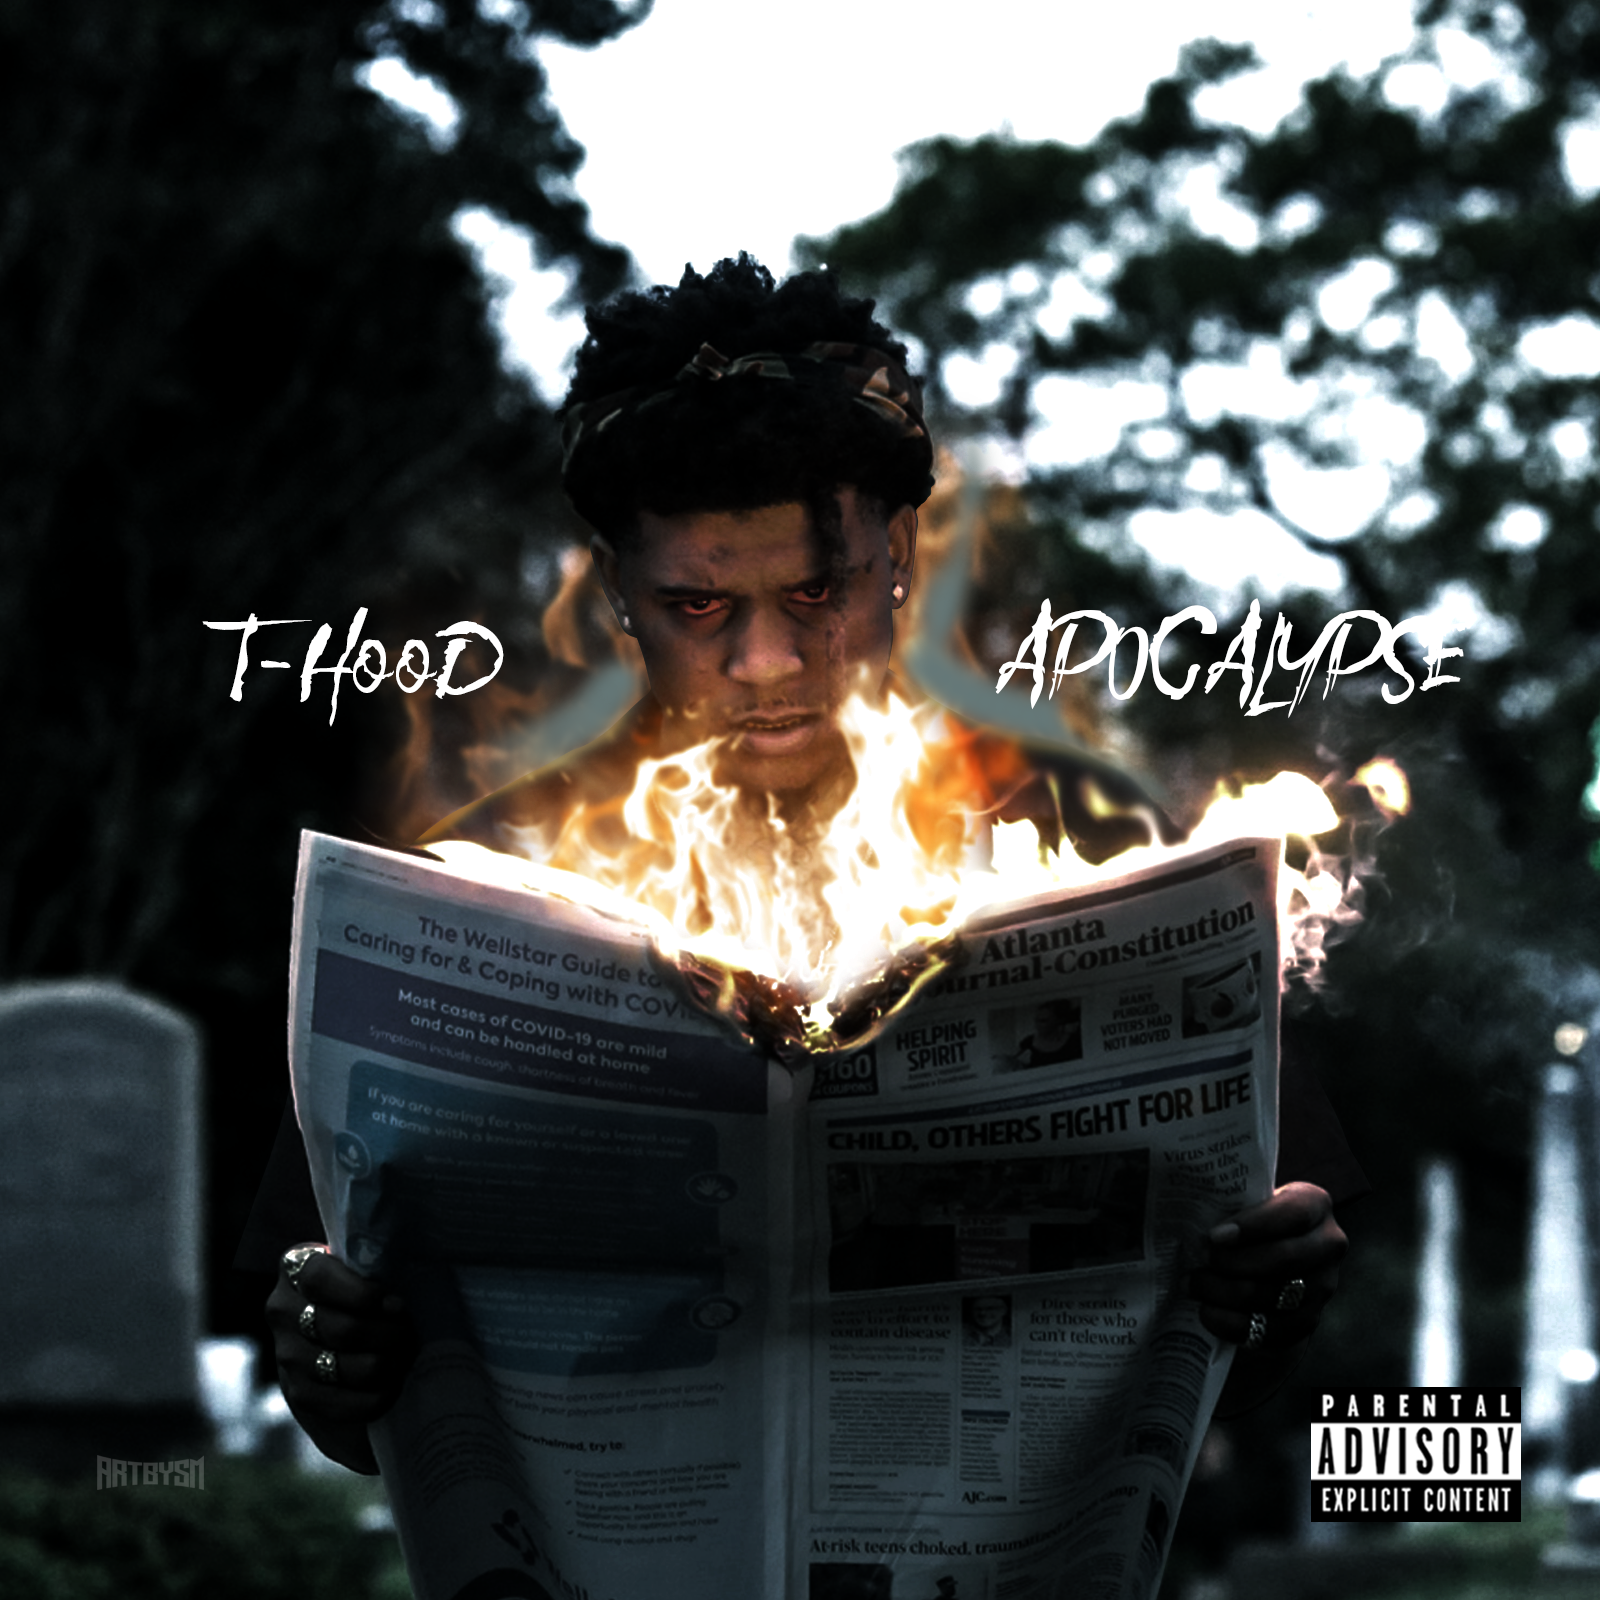 T-Hood Drops “Apocalypse” During Global Pandemic